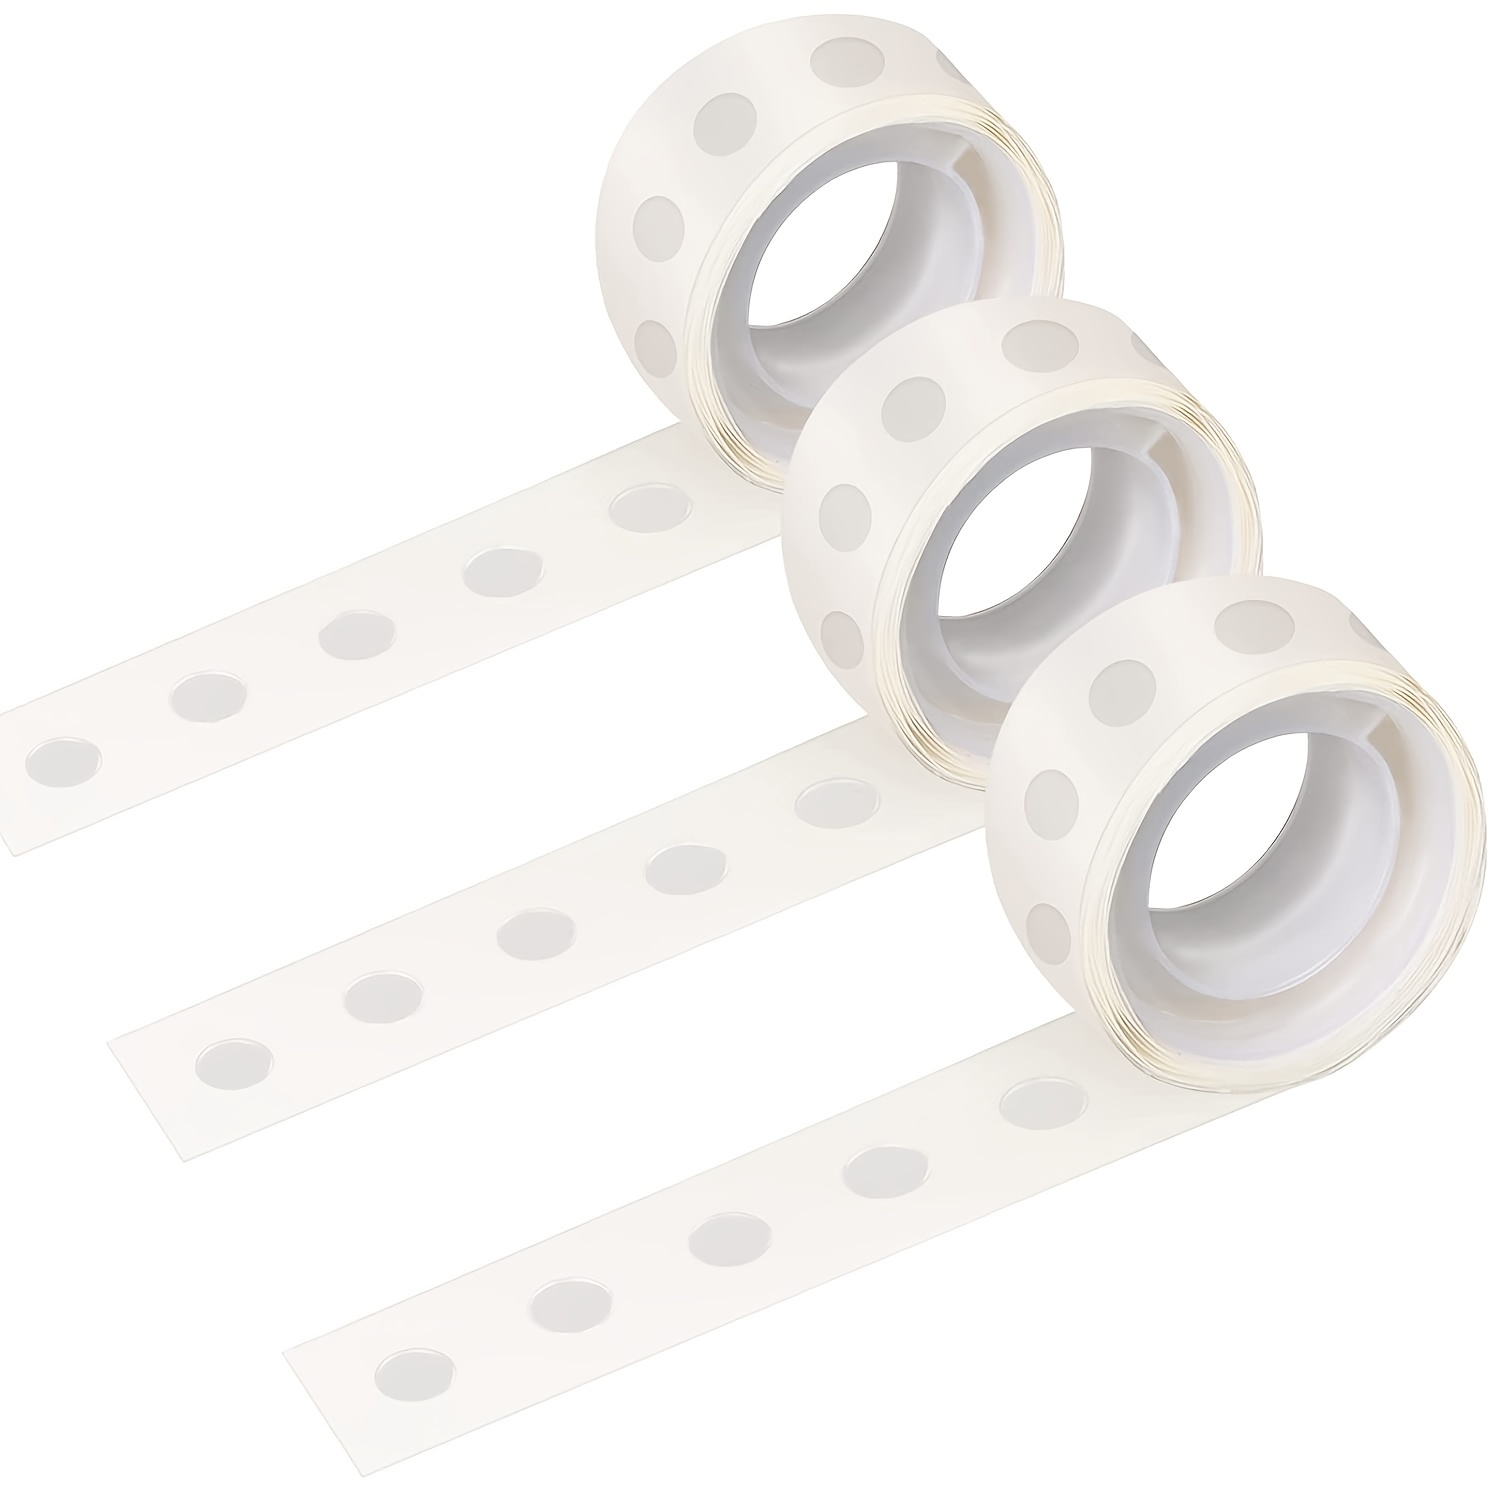 Glue Point 10mm, 2 Sided Adhesive Tape for Crafts 120 pcs - Clear